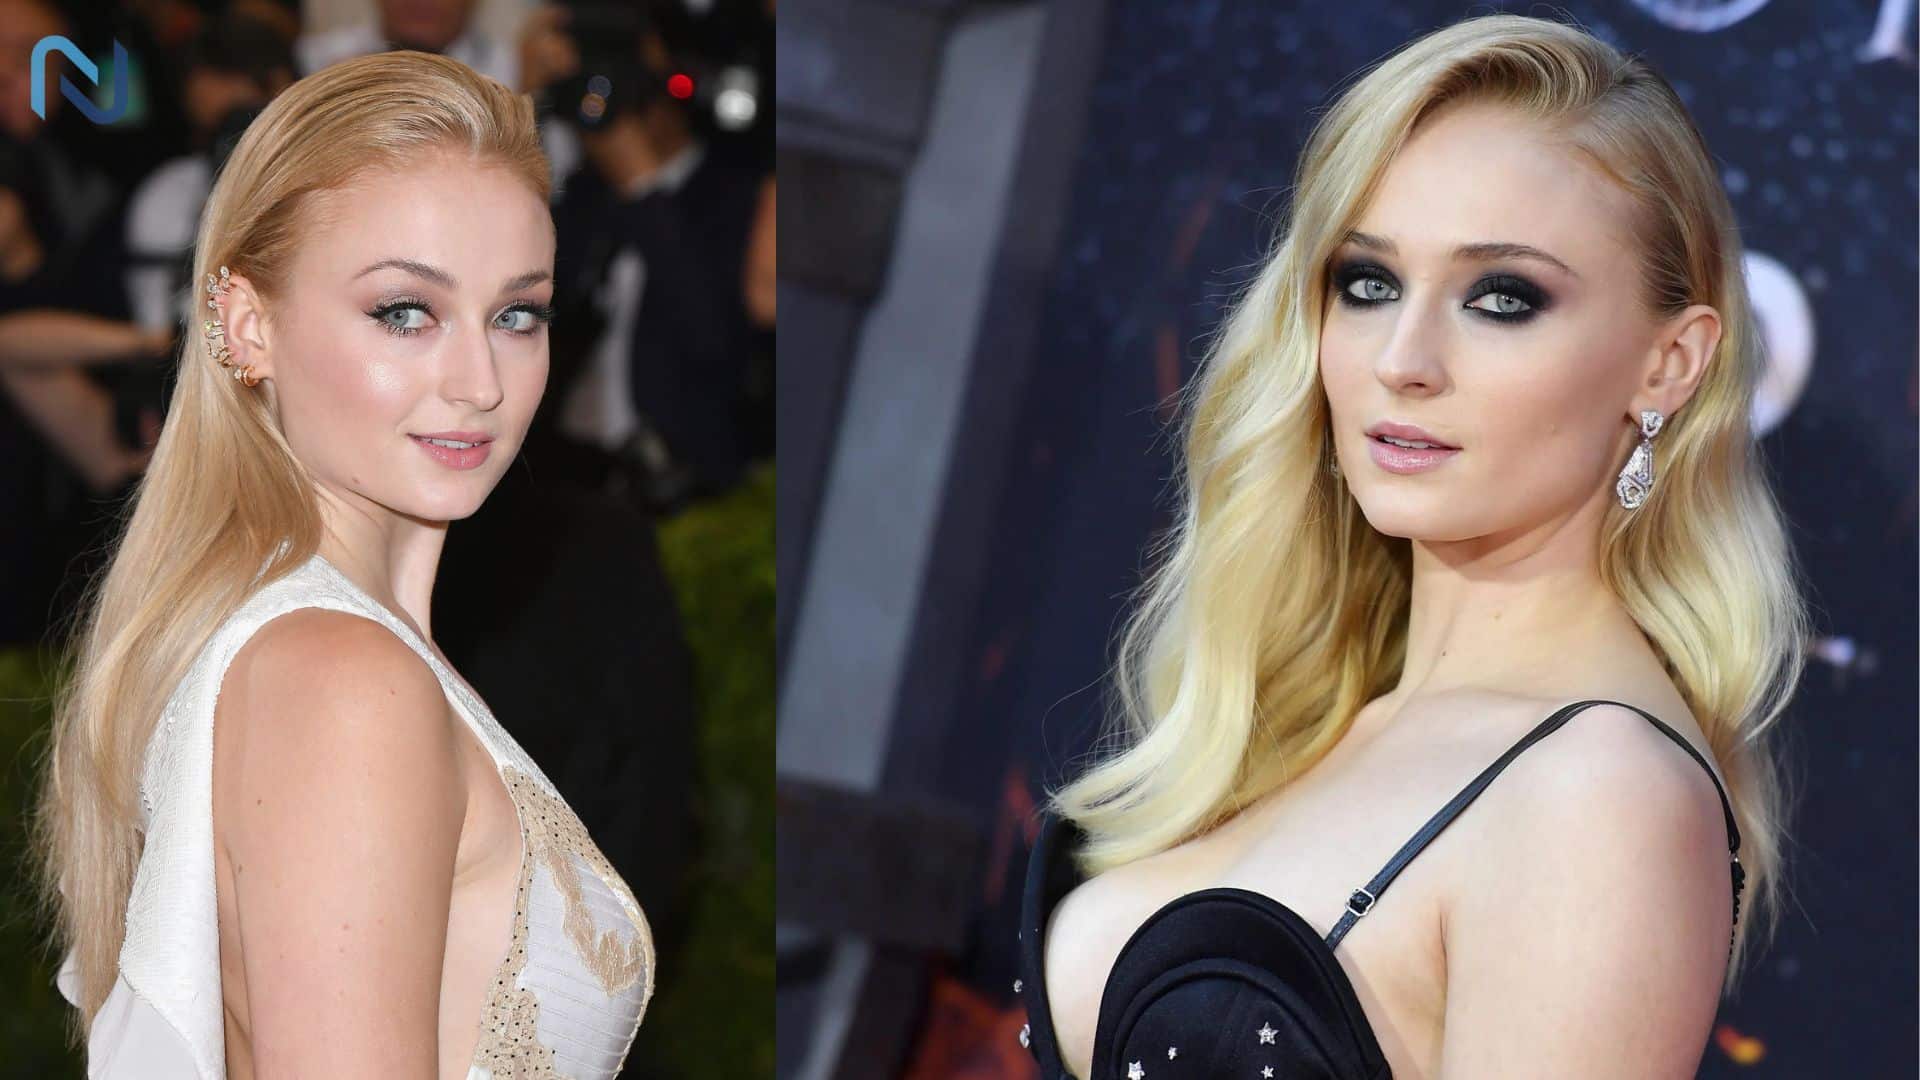 Sophie Turner Most Beautiful Hollywood Actress